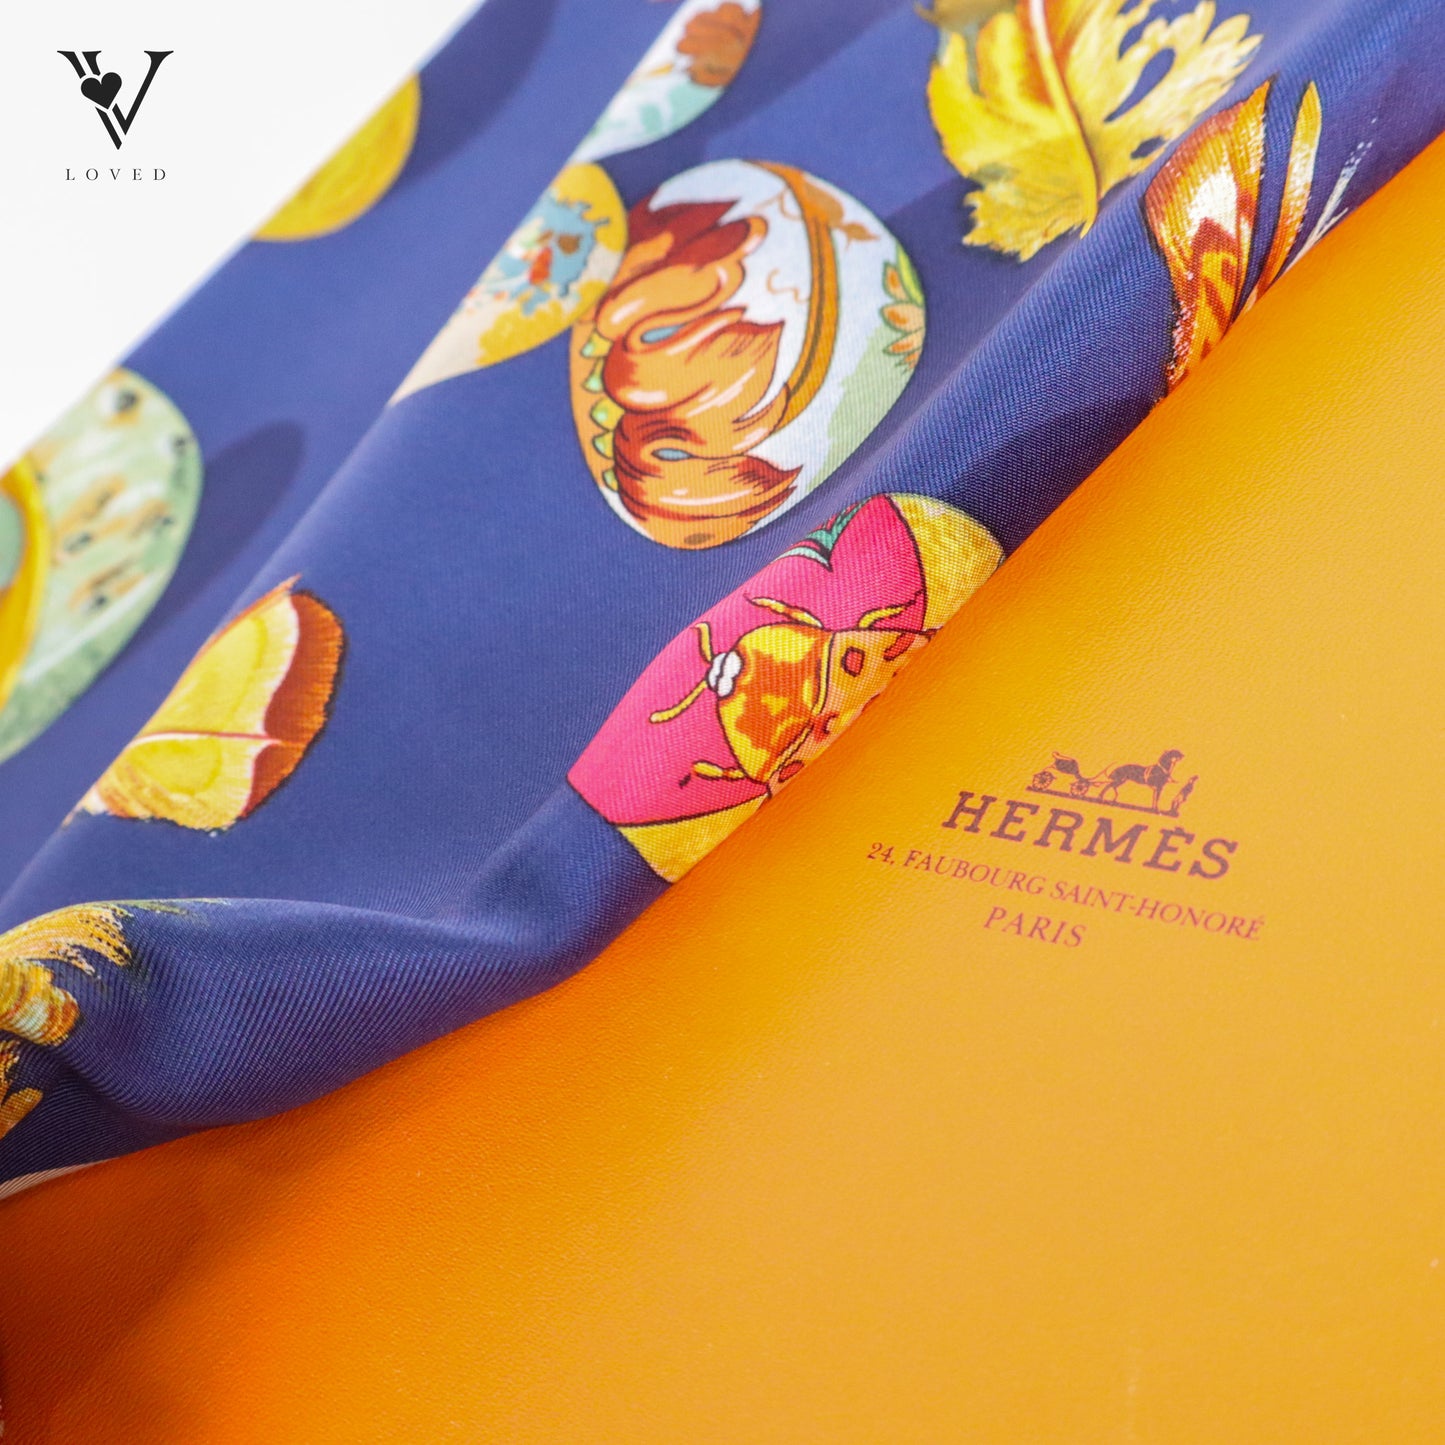 "Couvee d'Hermes" by Caty Latham Silk Scarf